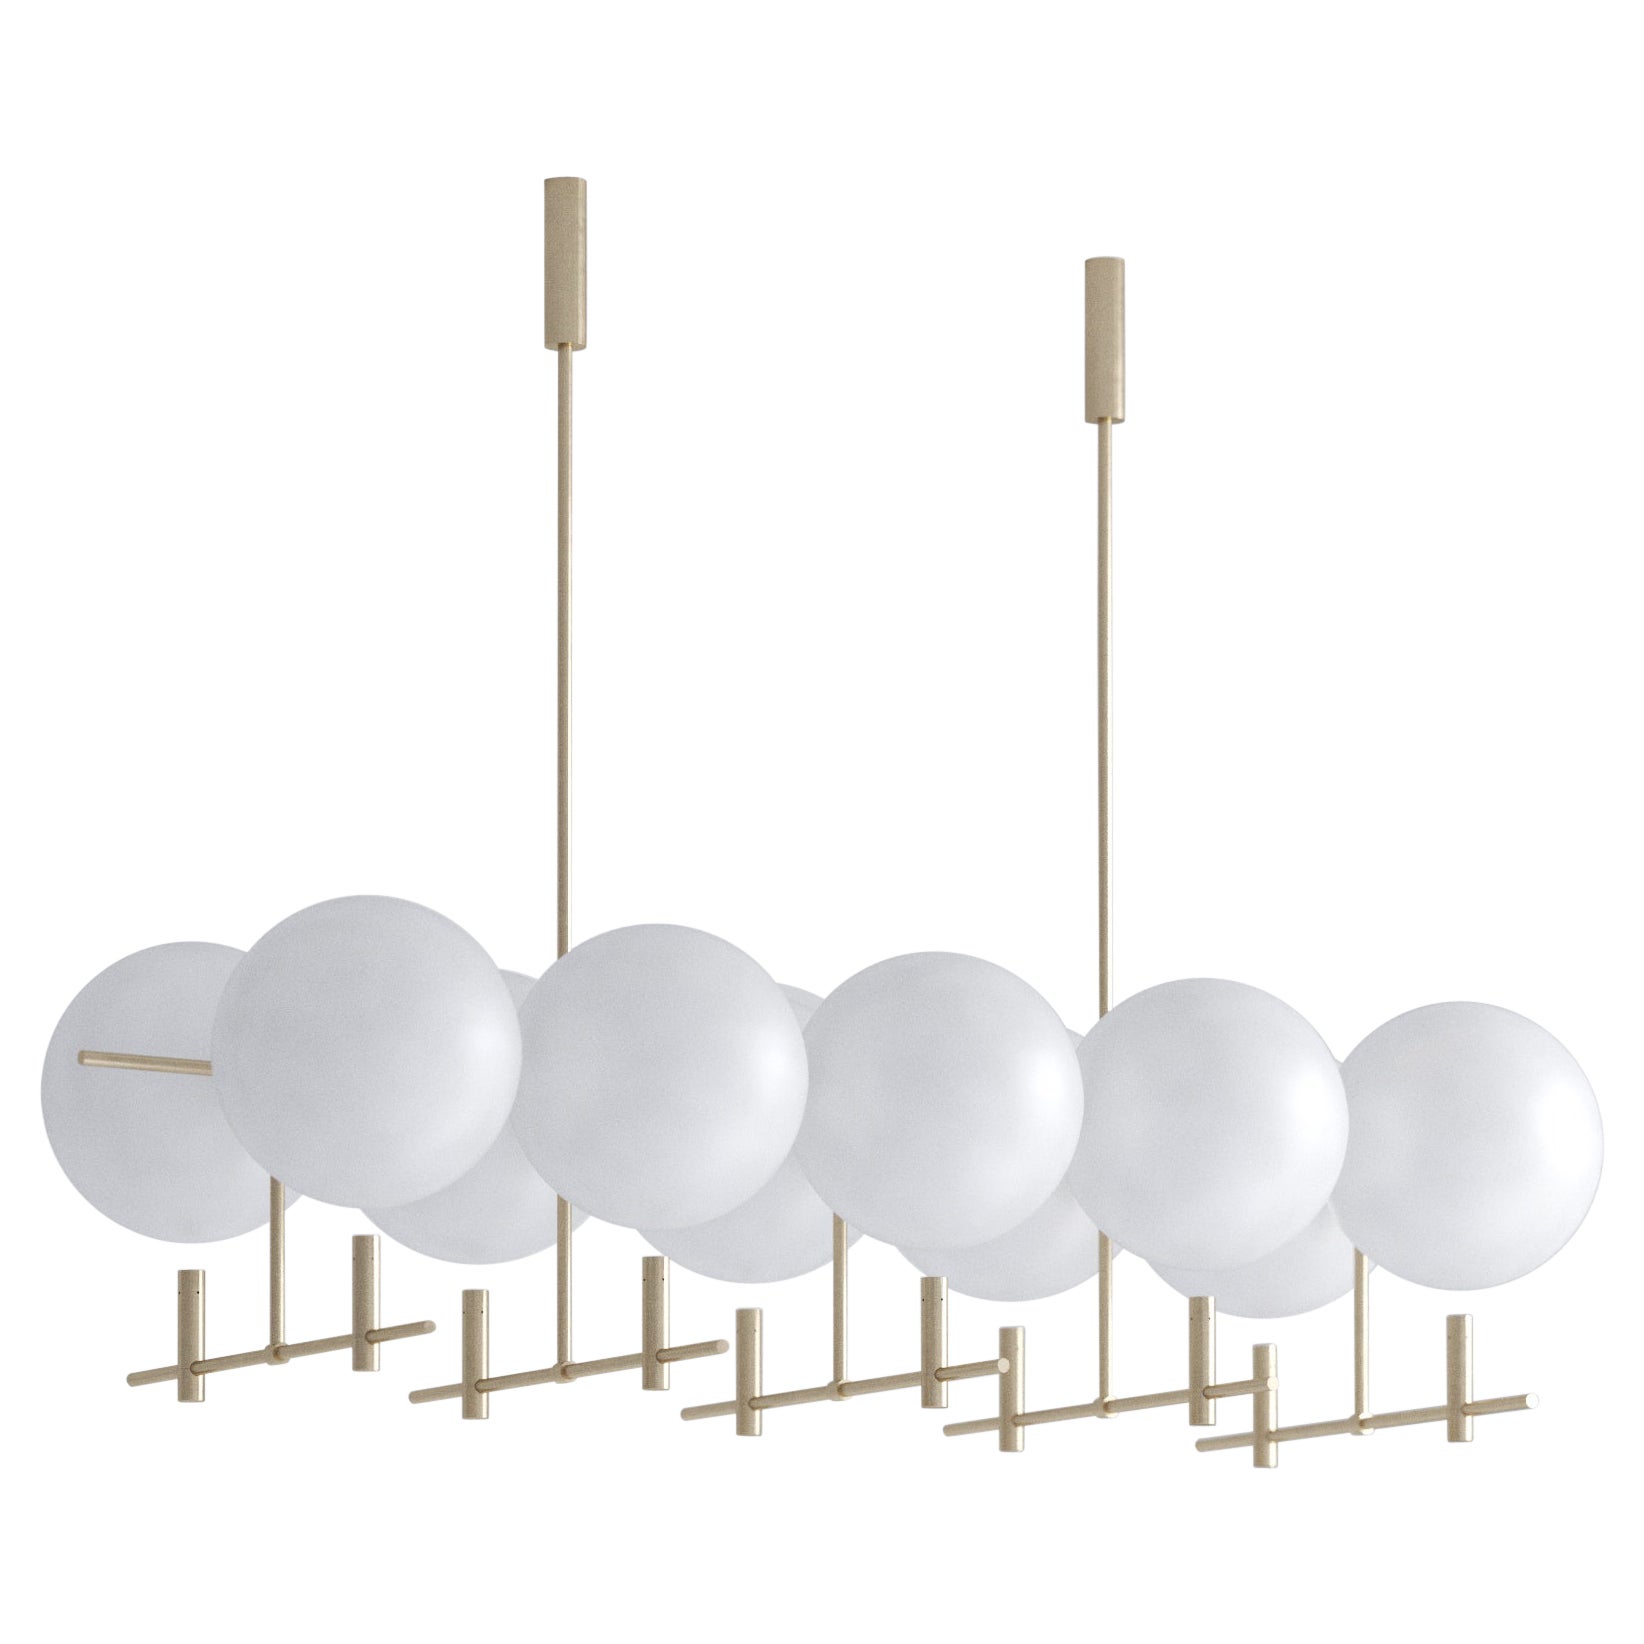 Luna Luminaire / Chandelier Horizontal II10 in Brushed Gold For Sale